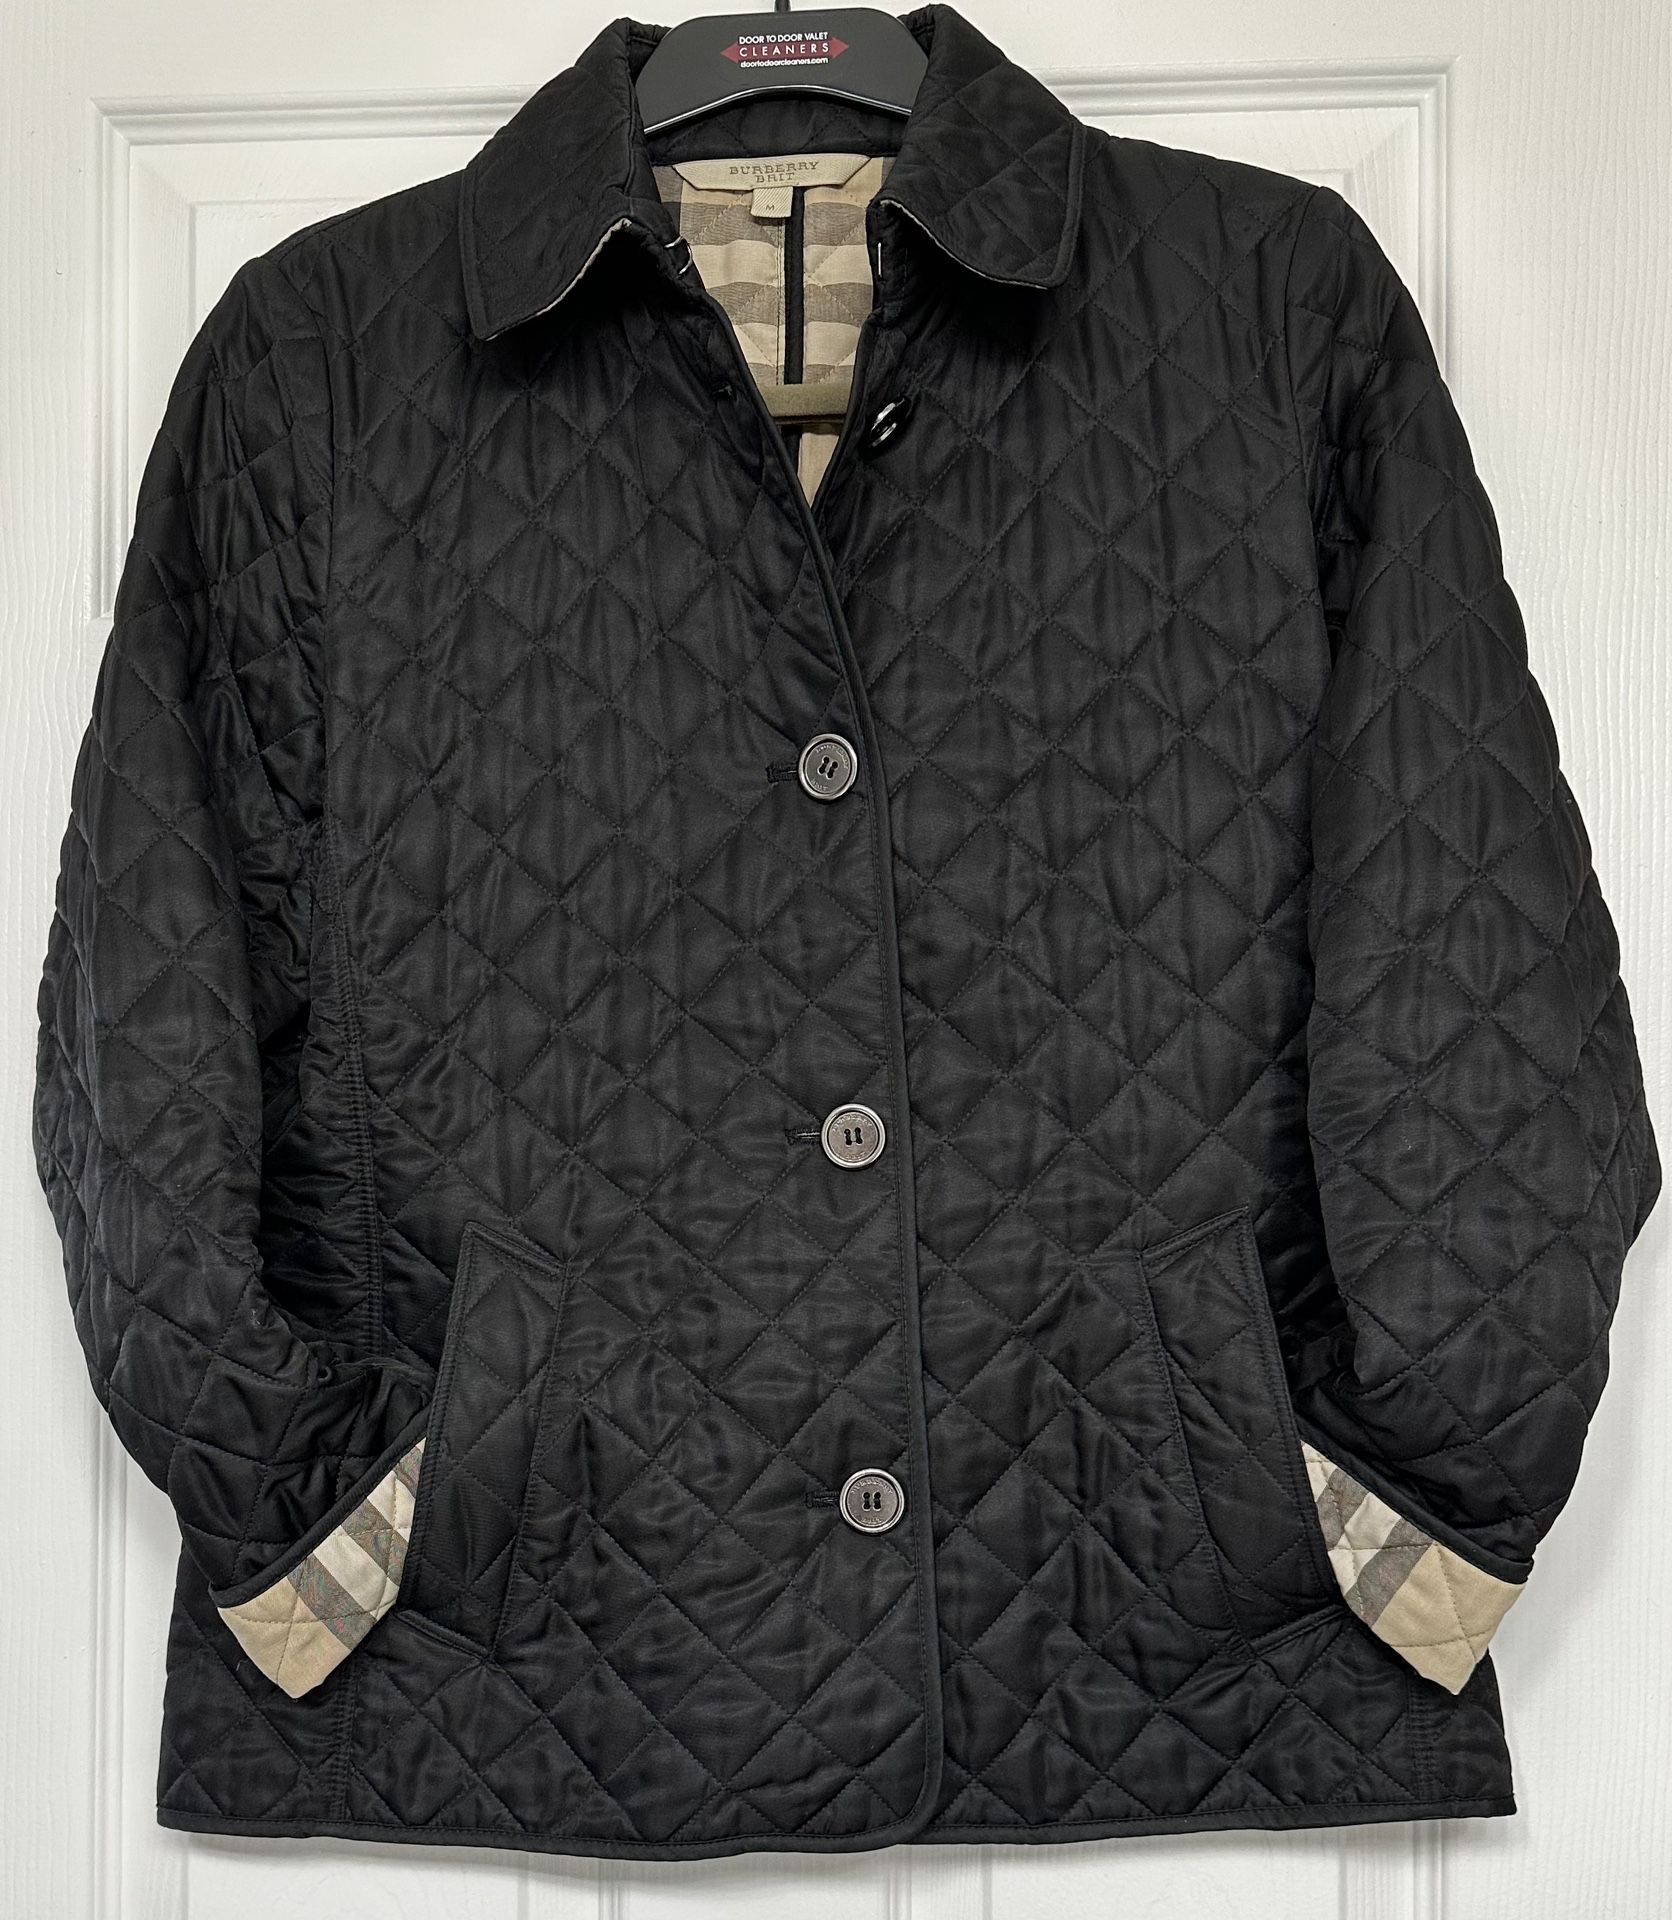 Women’s AUTHENTIC BURBERRY CLASSIC QUILTED JACKET 